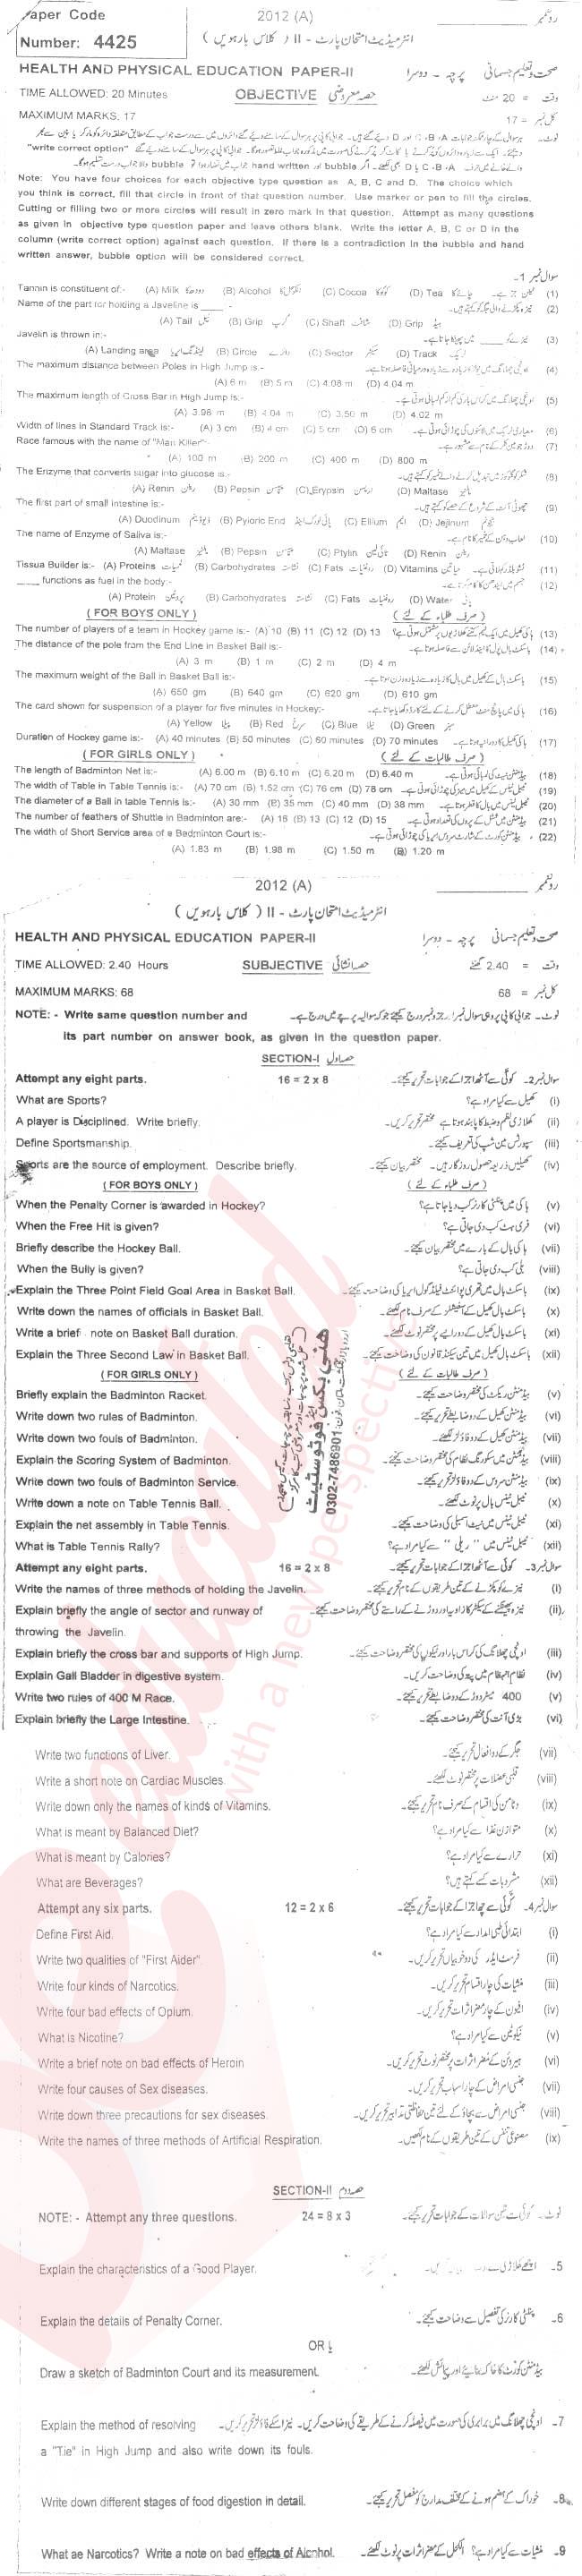 Health and Physical Education FA Part 2 Past Paper Group 1 BISE Multan 2012